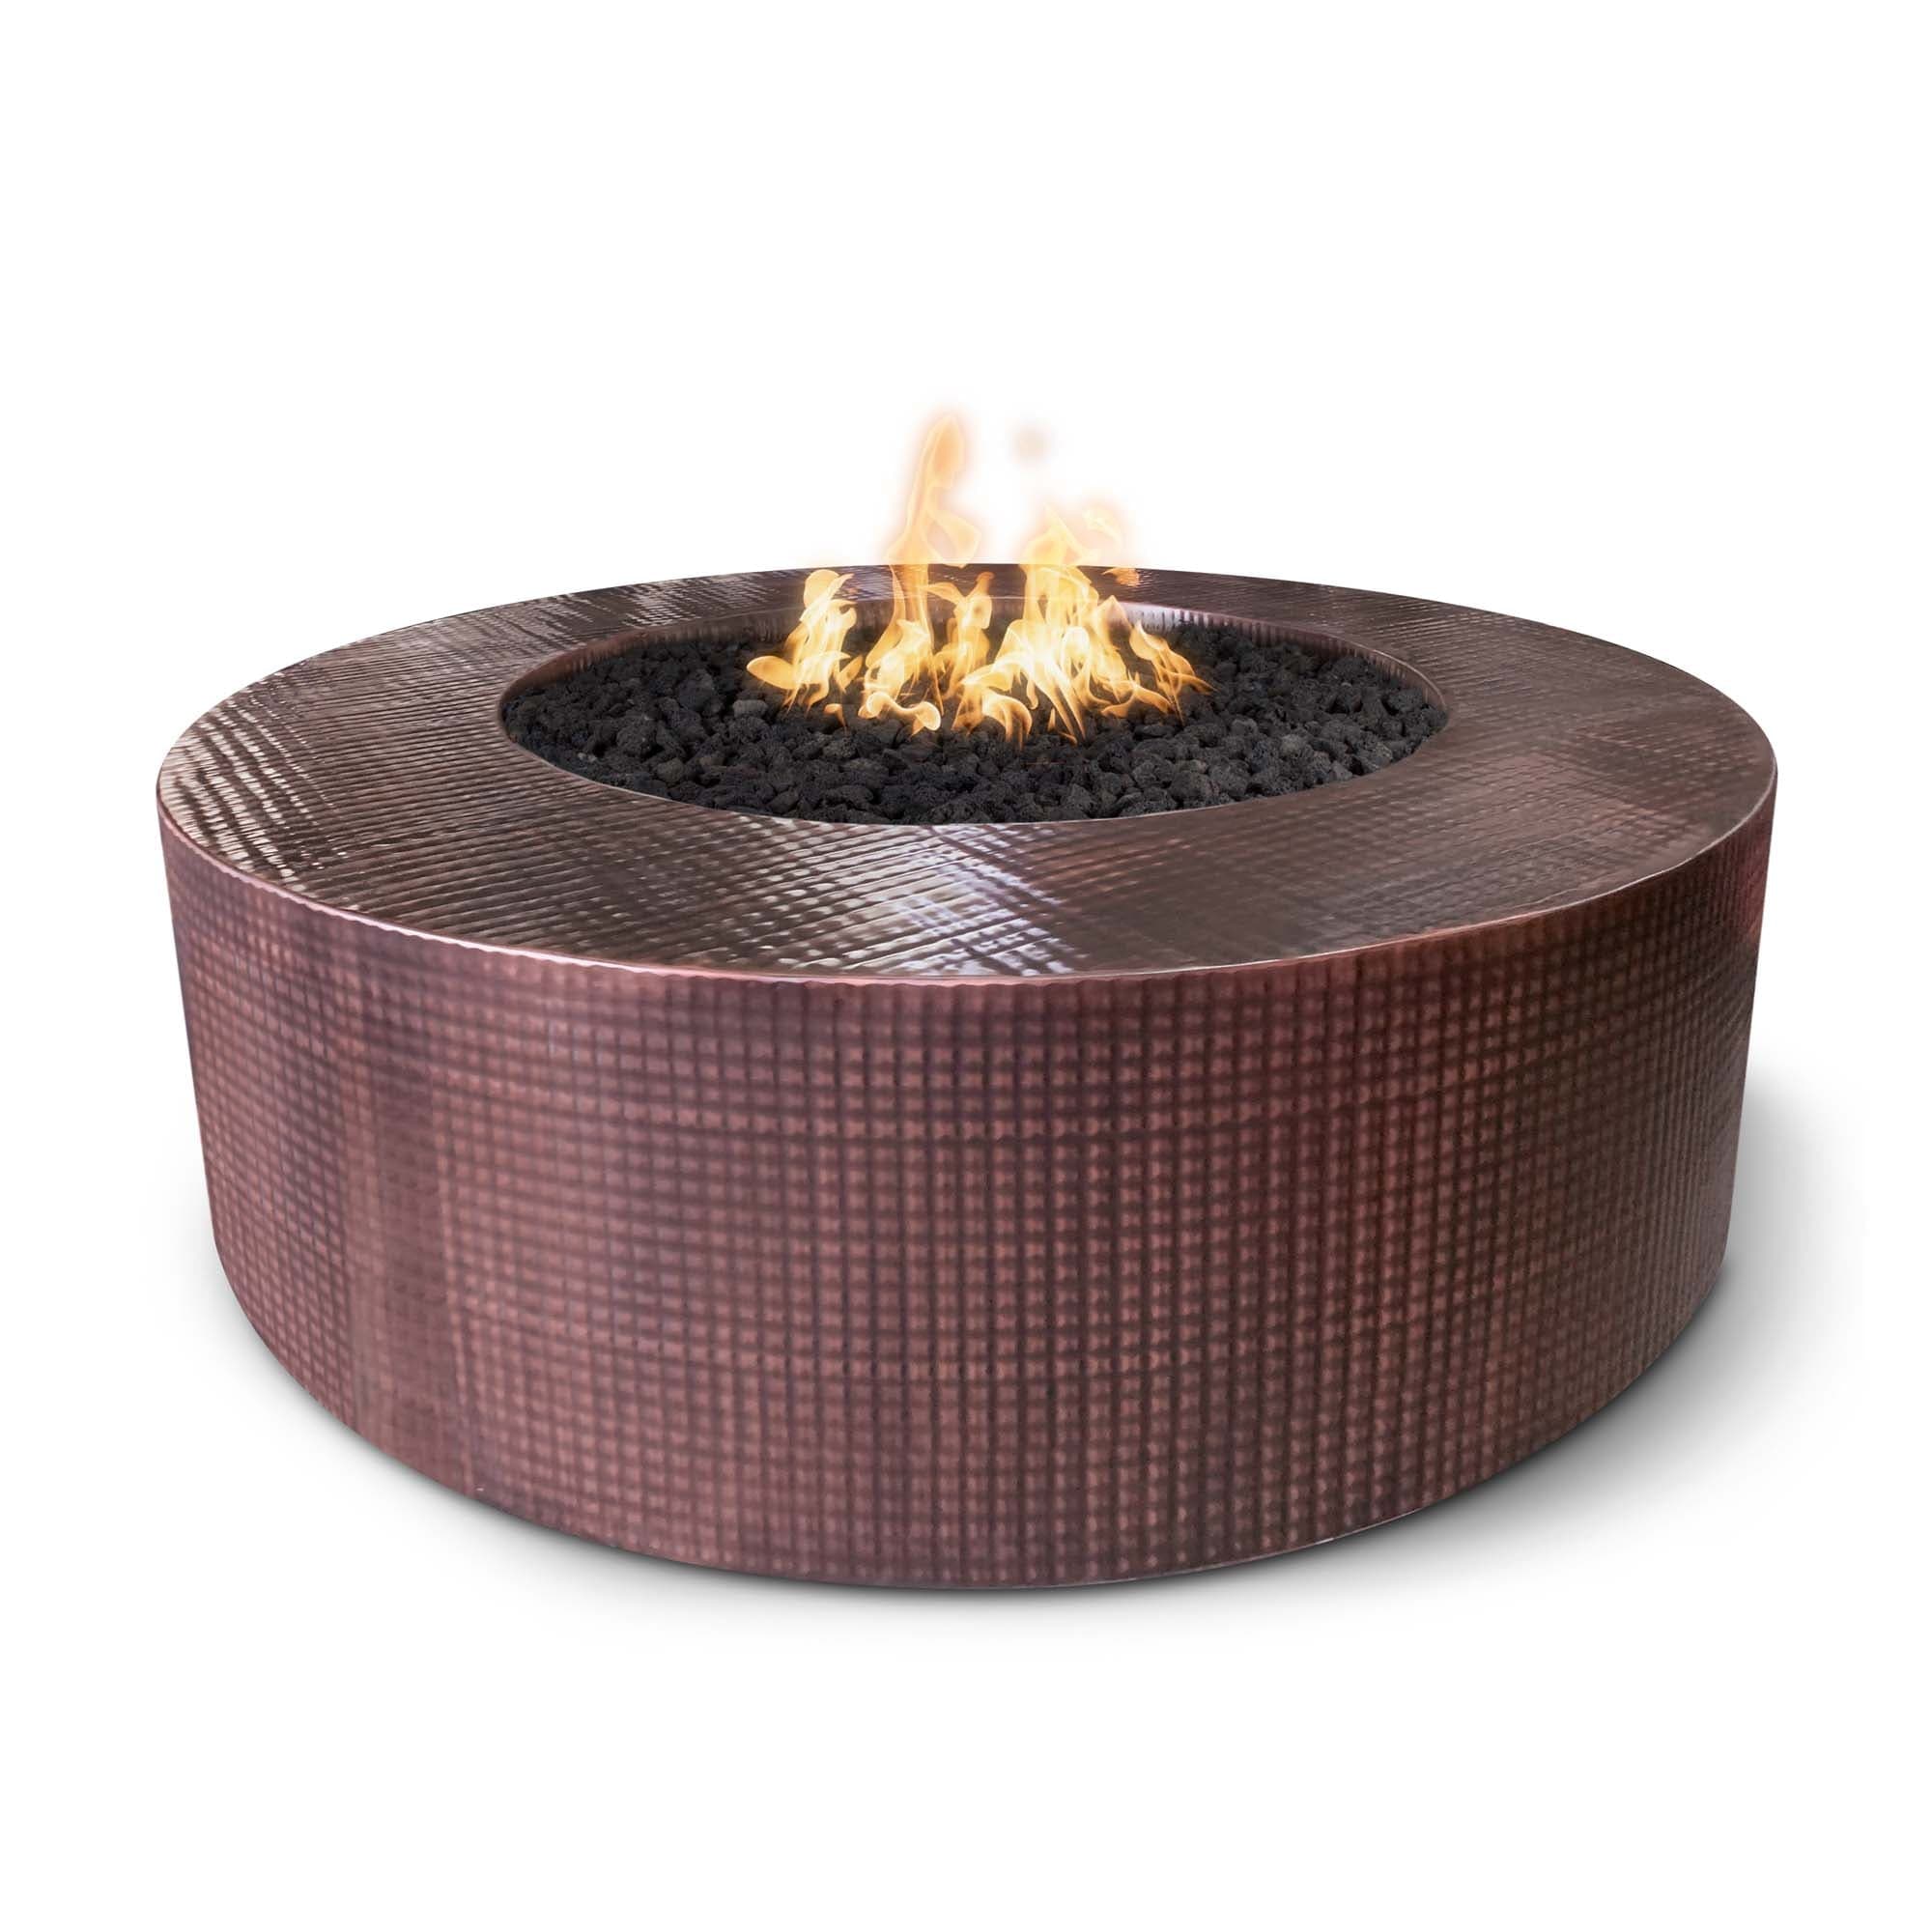 The Outdoor Plus Fire Pit 48" / Match Lit The Outdoor Plus Unity Fire Pit 18" Tall | Hammered Copper OPT-UNYCP4818